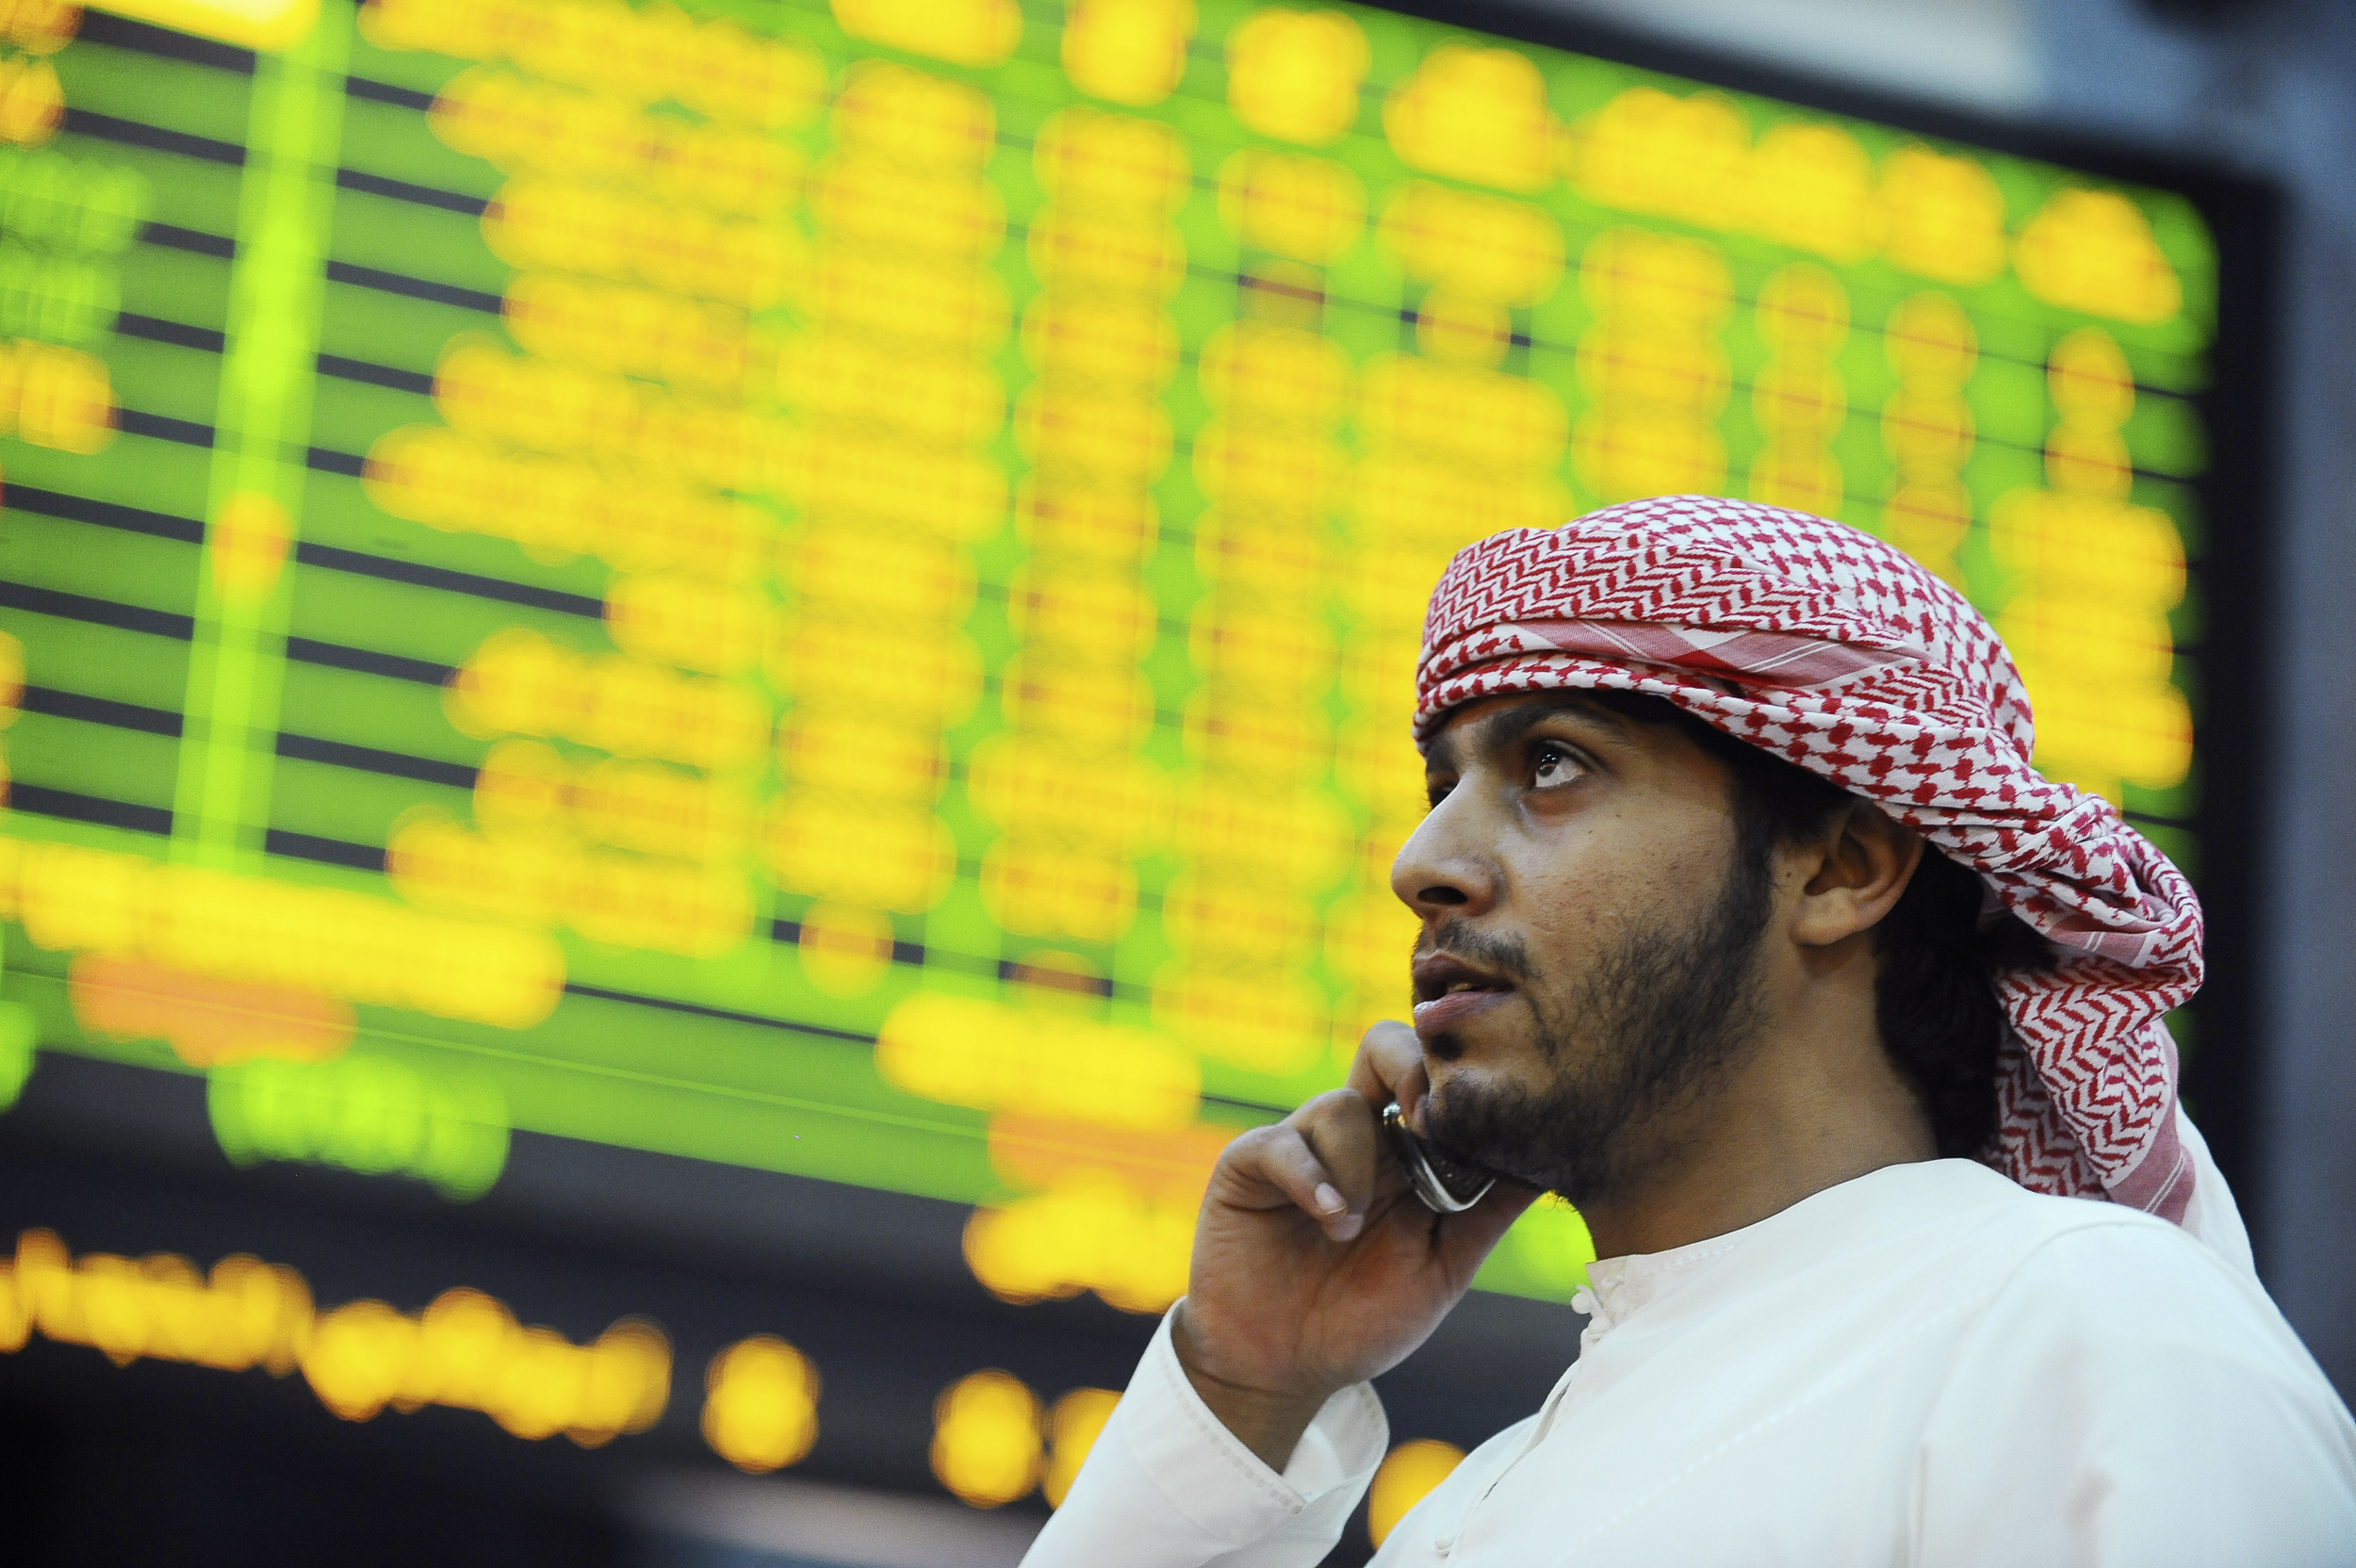 An investor looks up at electronic boards displaying stock information at the ADX Abu Dhabi Securities Exchange stock market